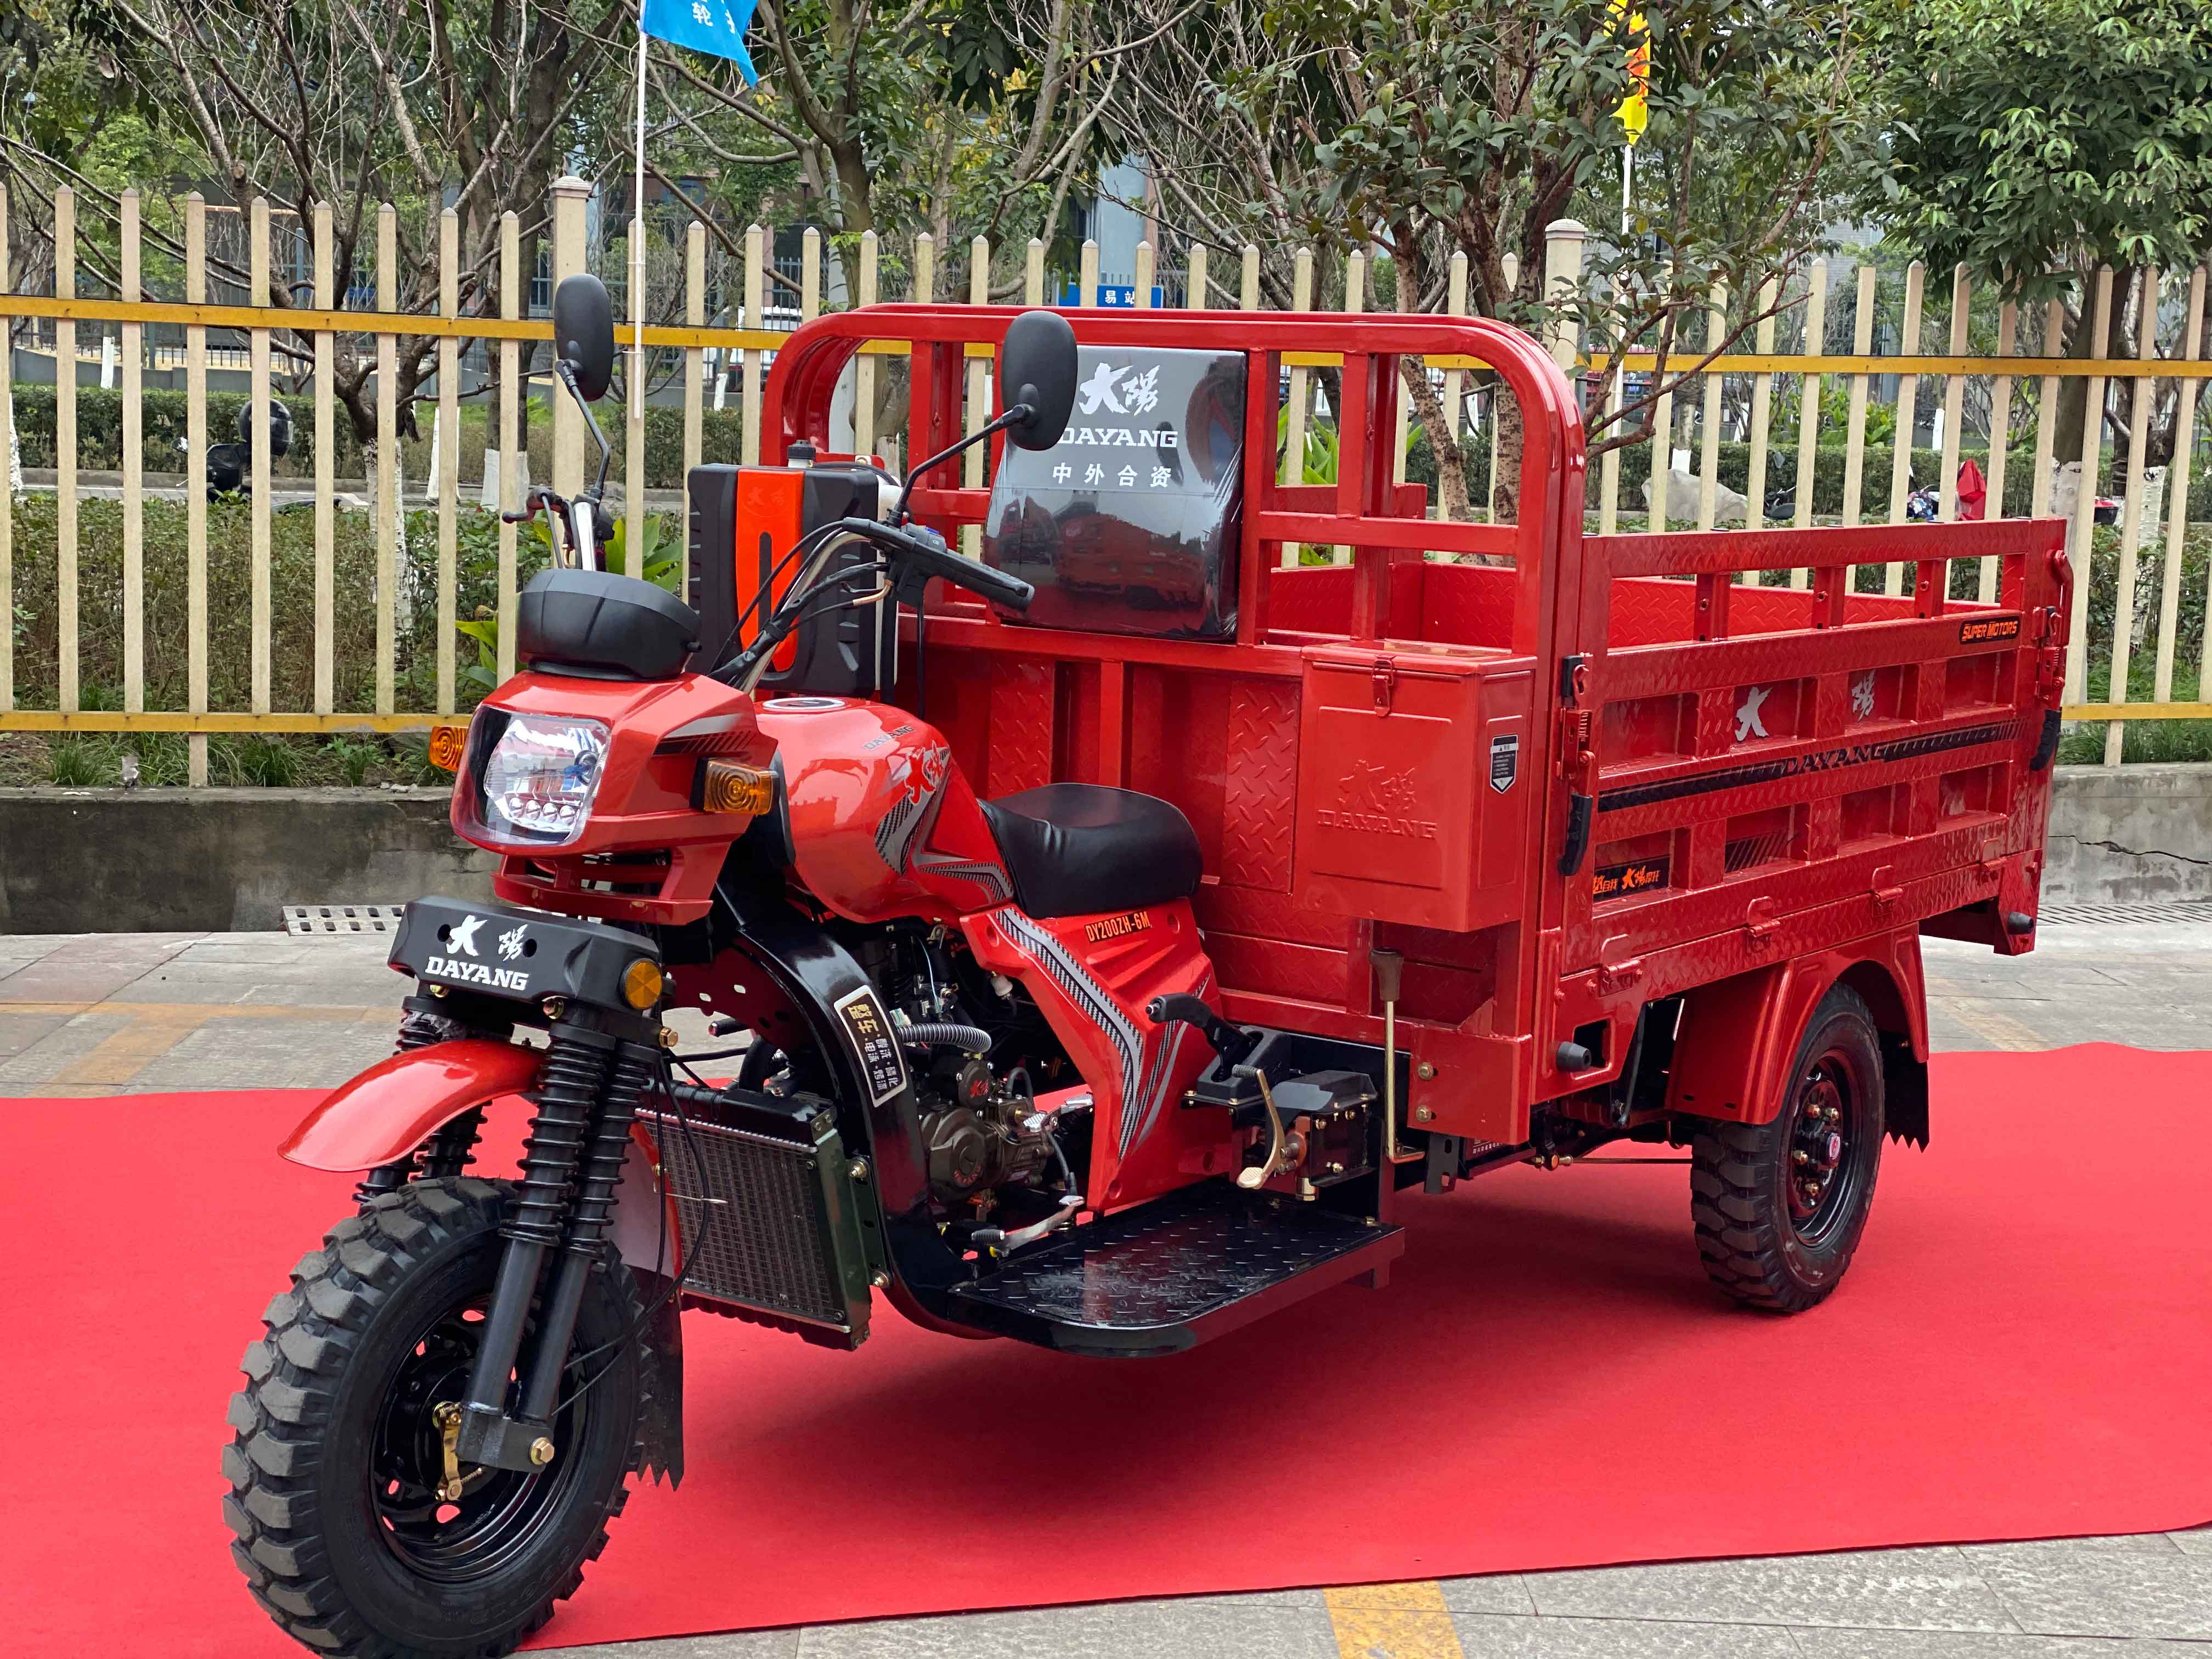 Adult Motorized Tricycle for Cargo Use